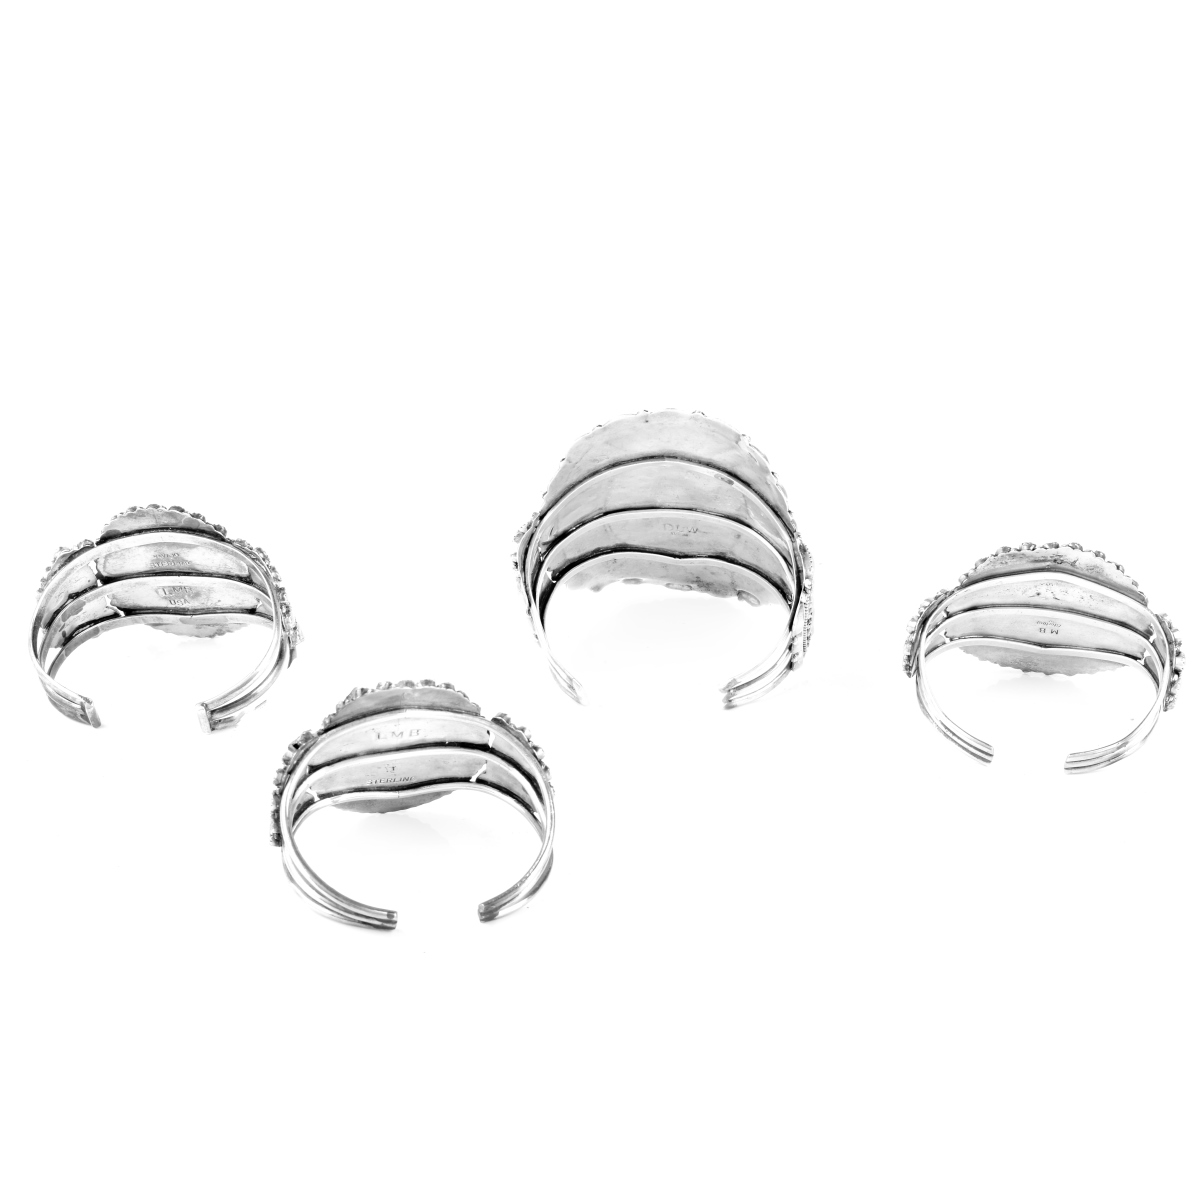 Four (4) Silver and Turquoise Cuff Bangles